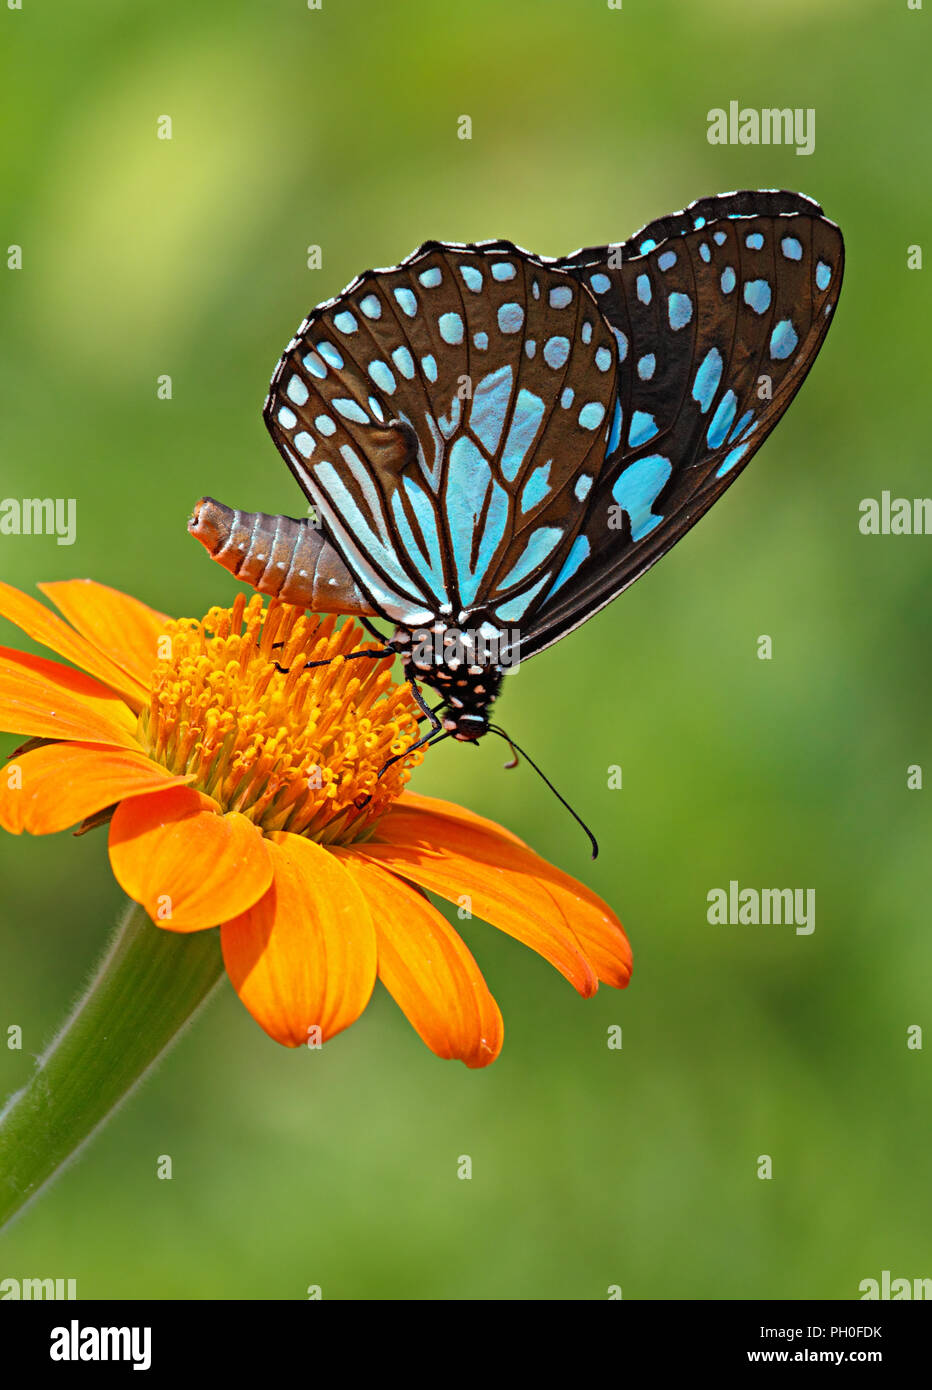 Blue tiger butterfly or Danaid Tirumala limniace on an orange flower with green background. Stock Photo